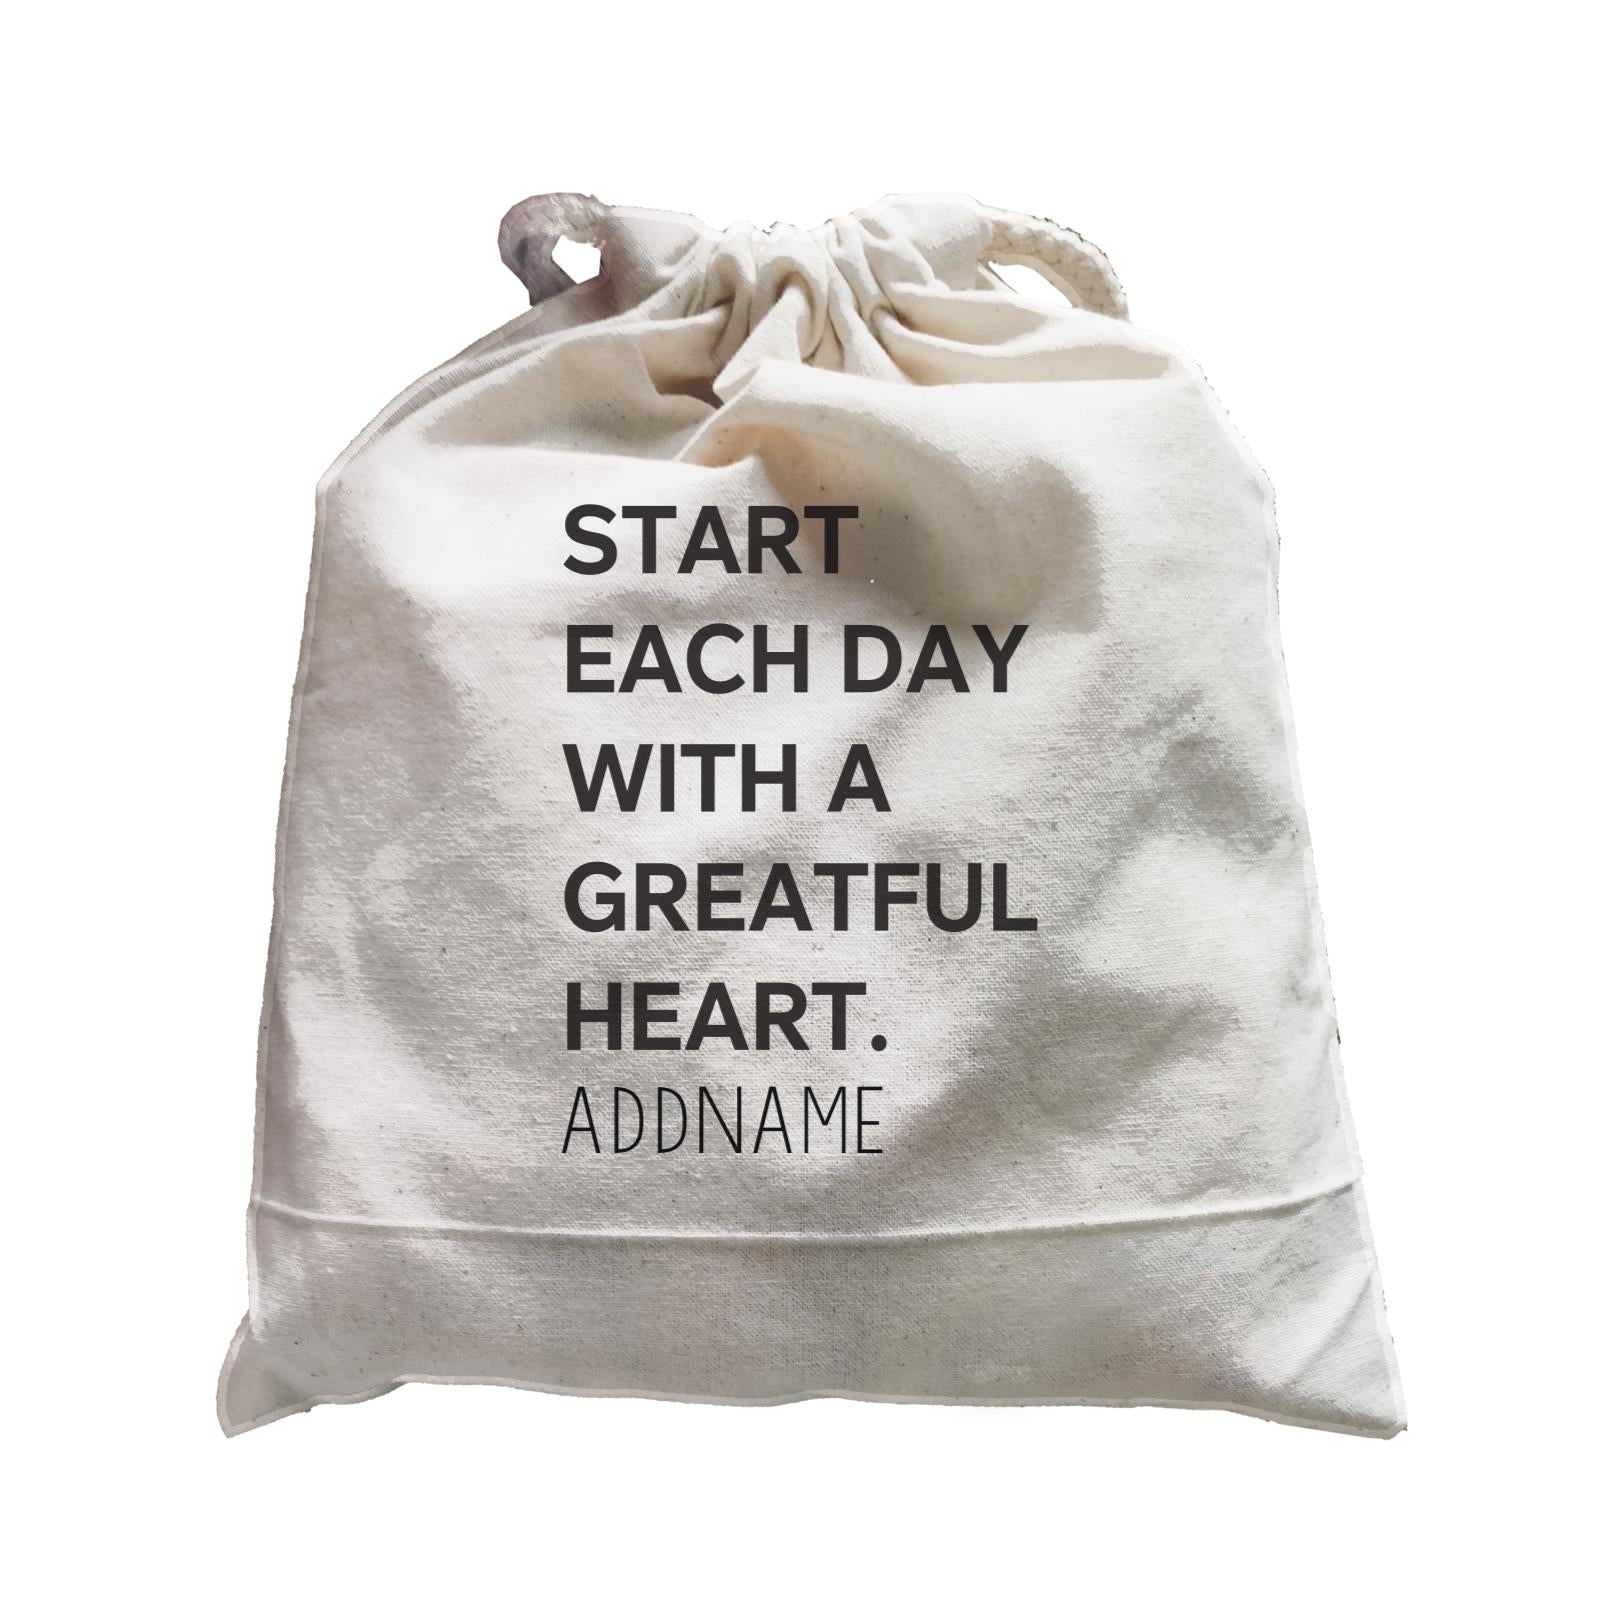 Inspiration Quotes Start Each Day With A Greatful Heart Addname Satchel